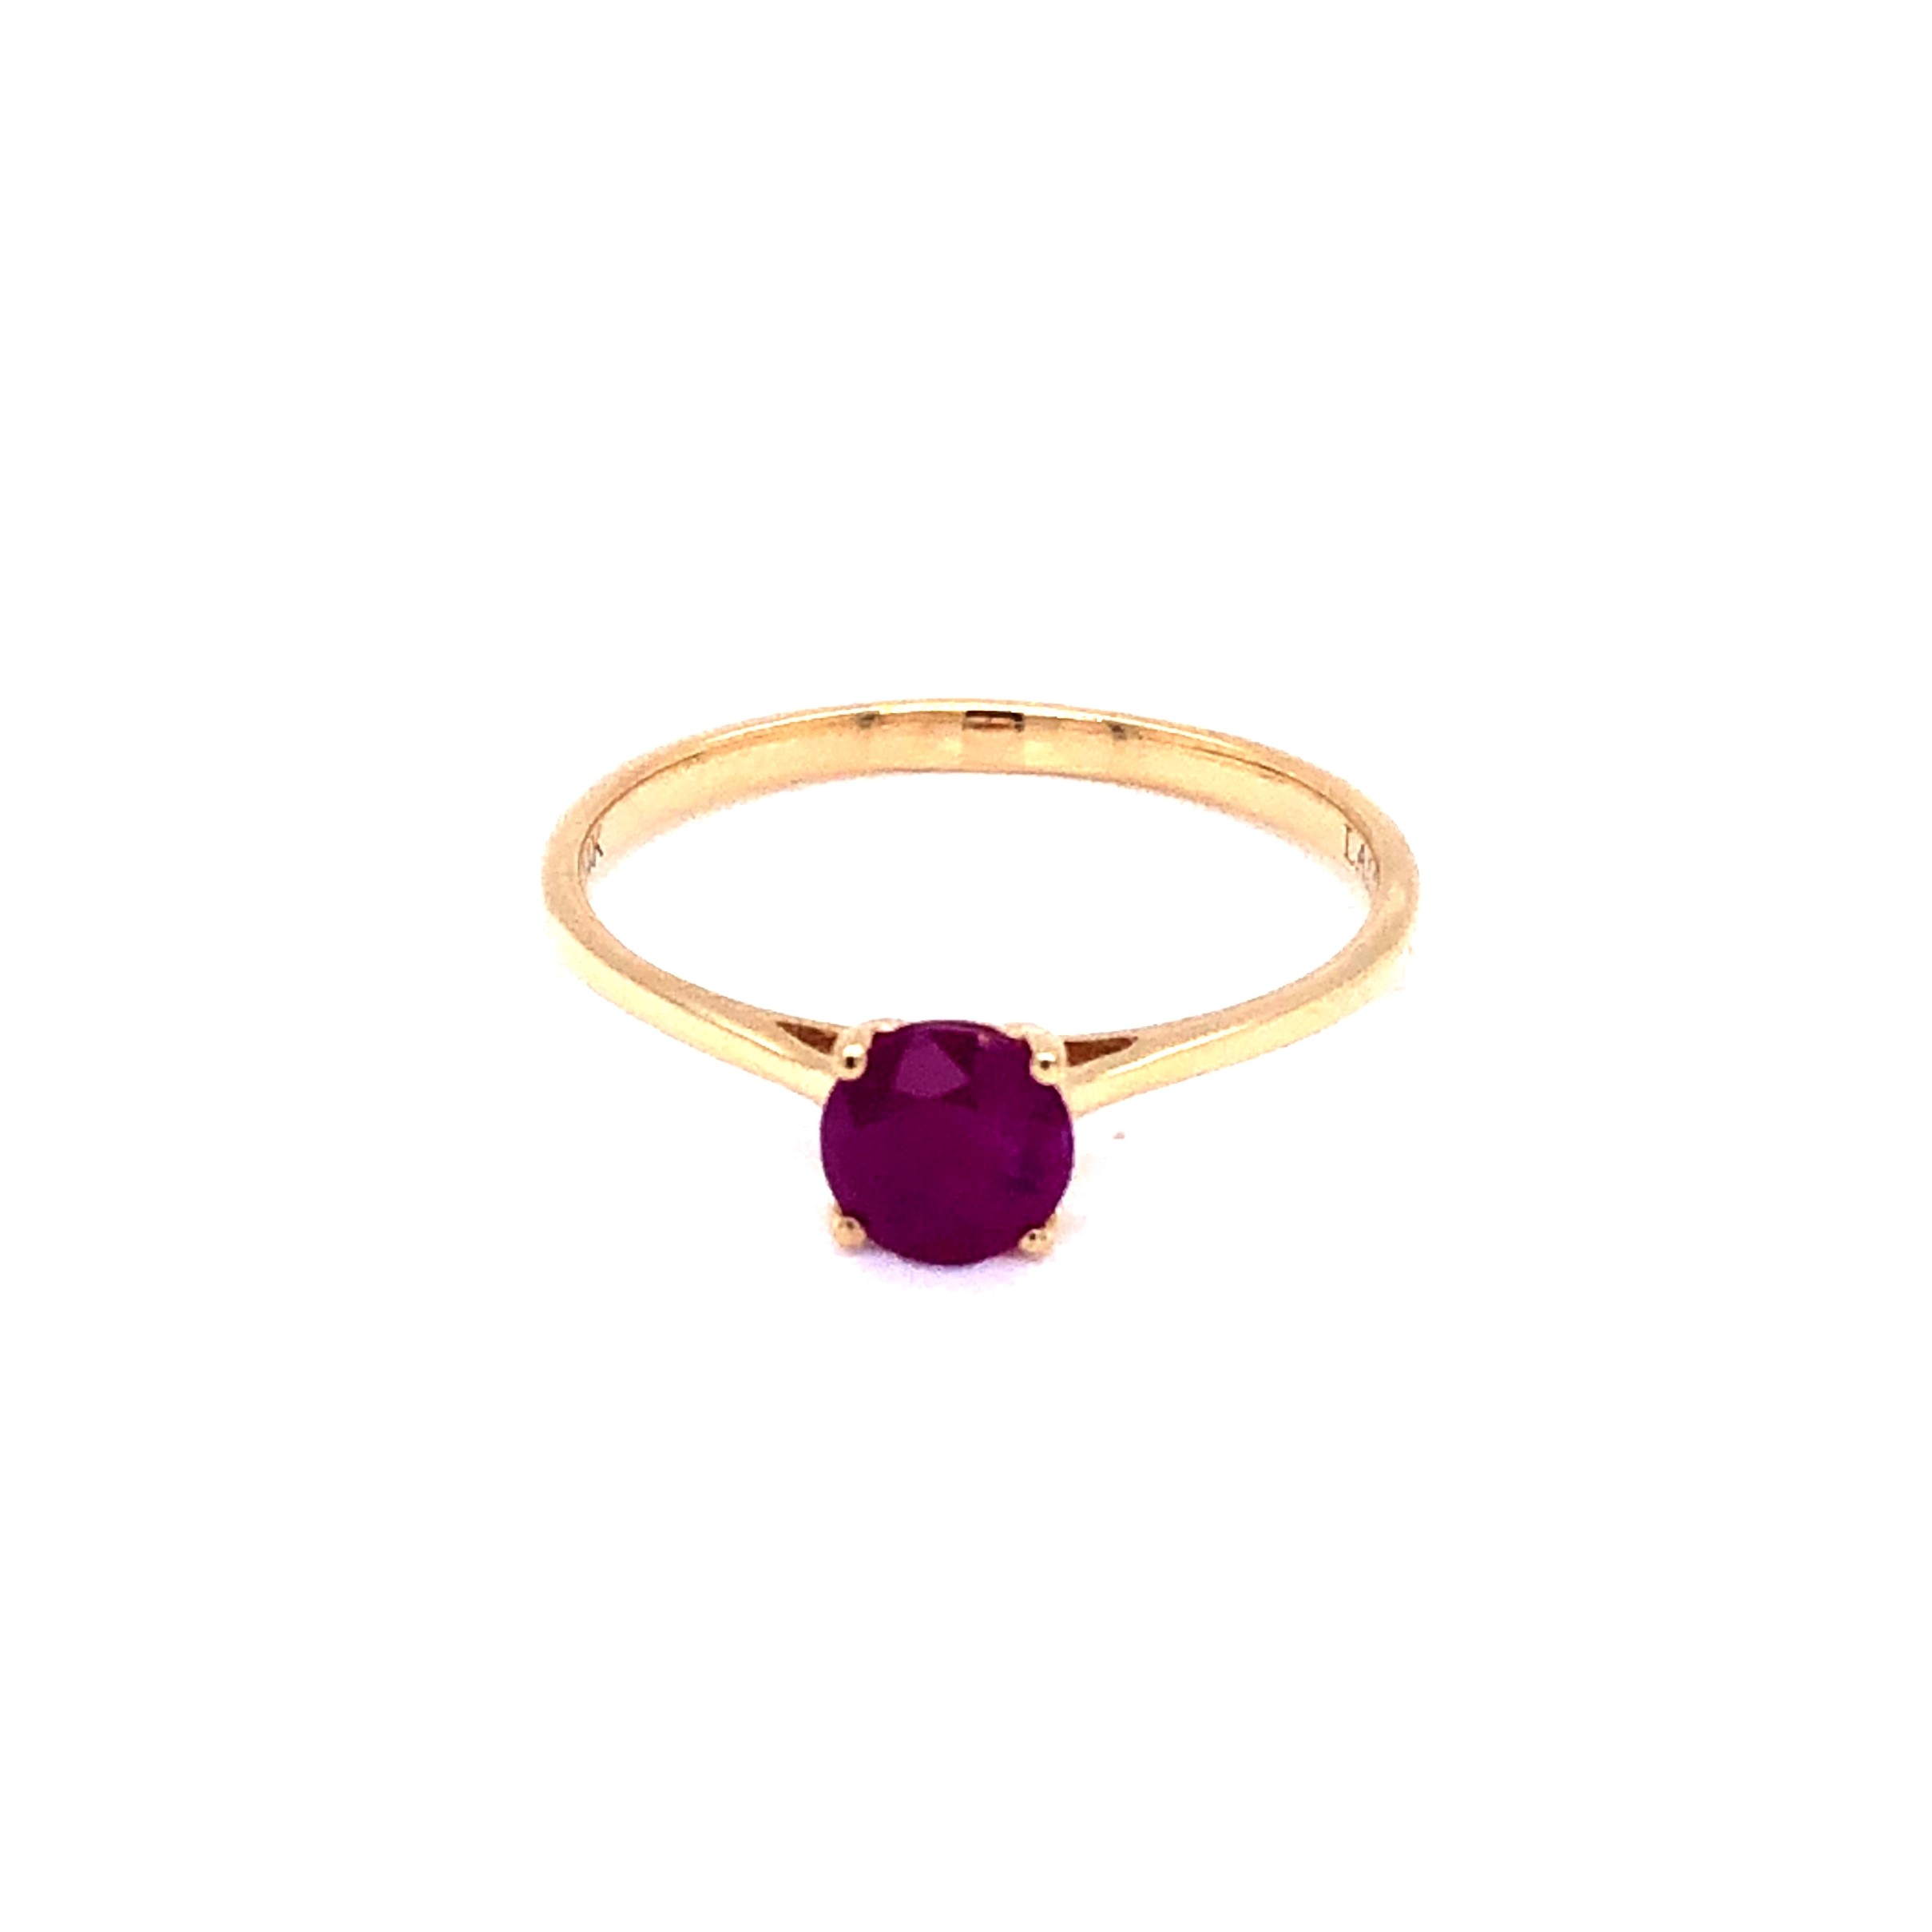 Lady s Yellow 14 Karat Ring With One 5.00MM Round Ruby